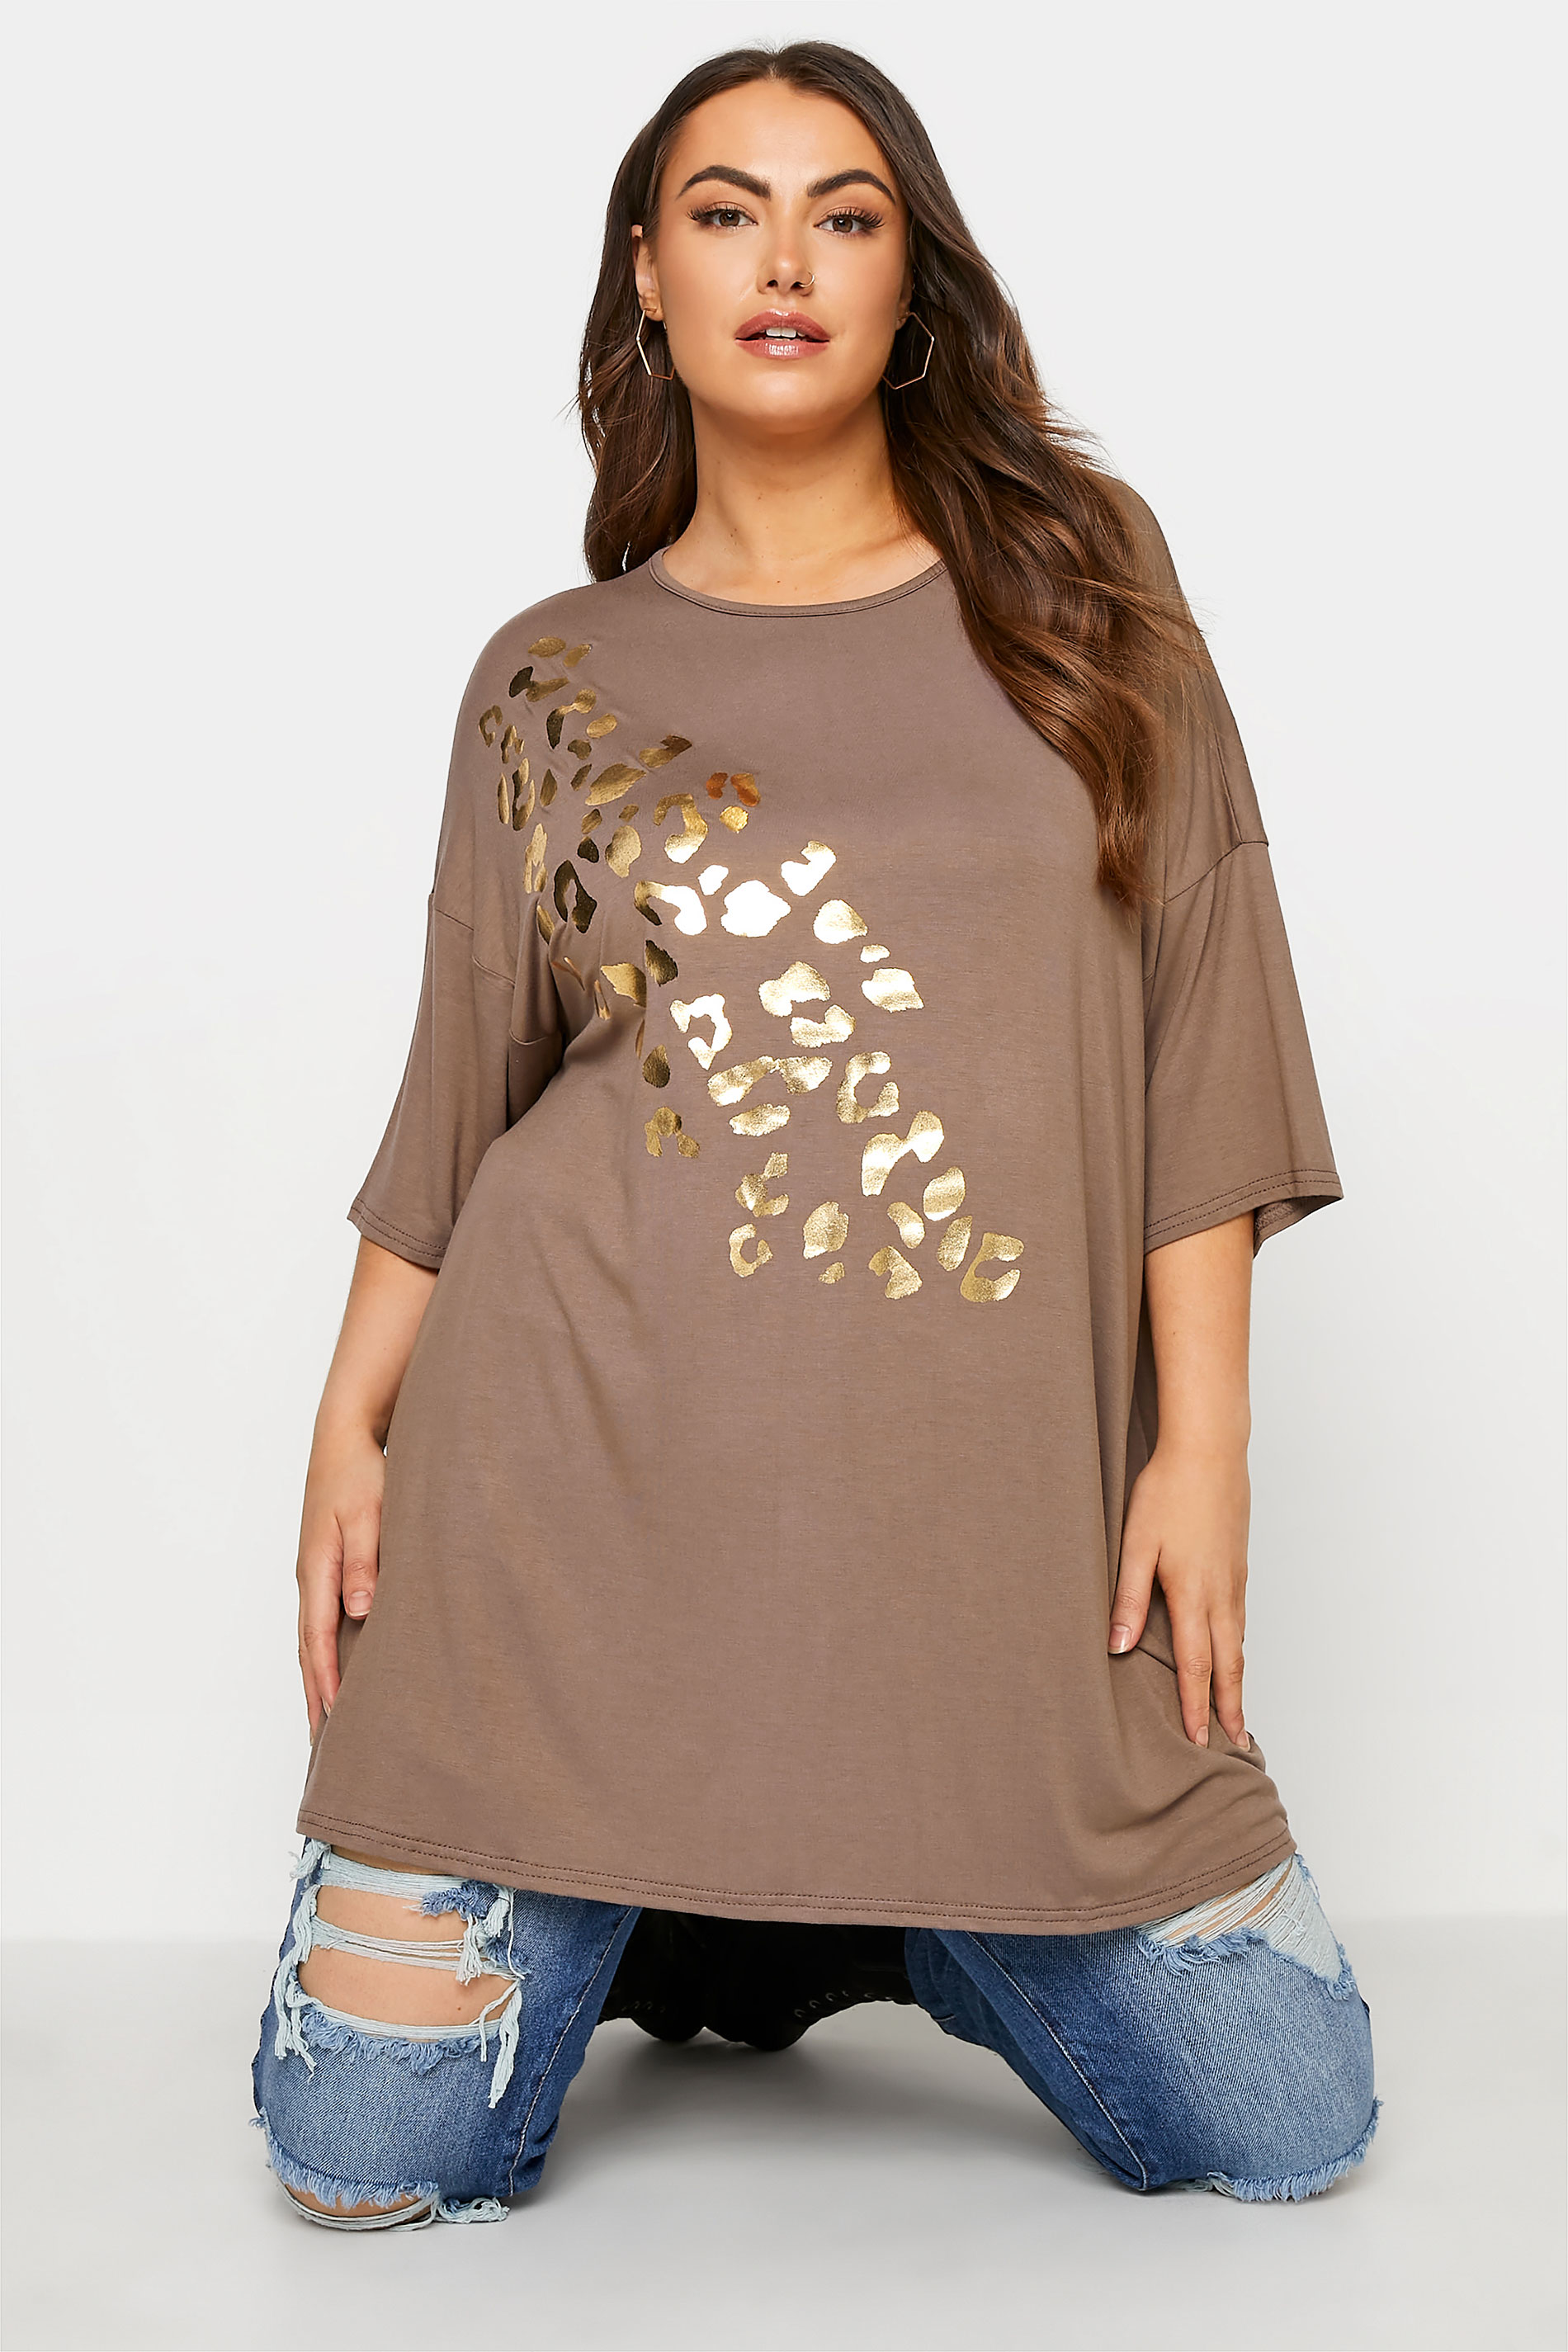 LIMITED COLLECTION Mocha Foil Leopard Print Oversized Tee_A.jpg